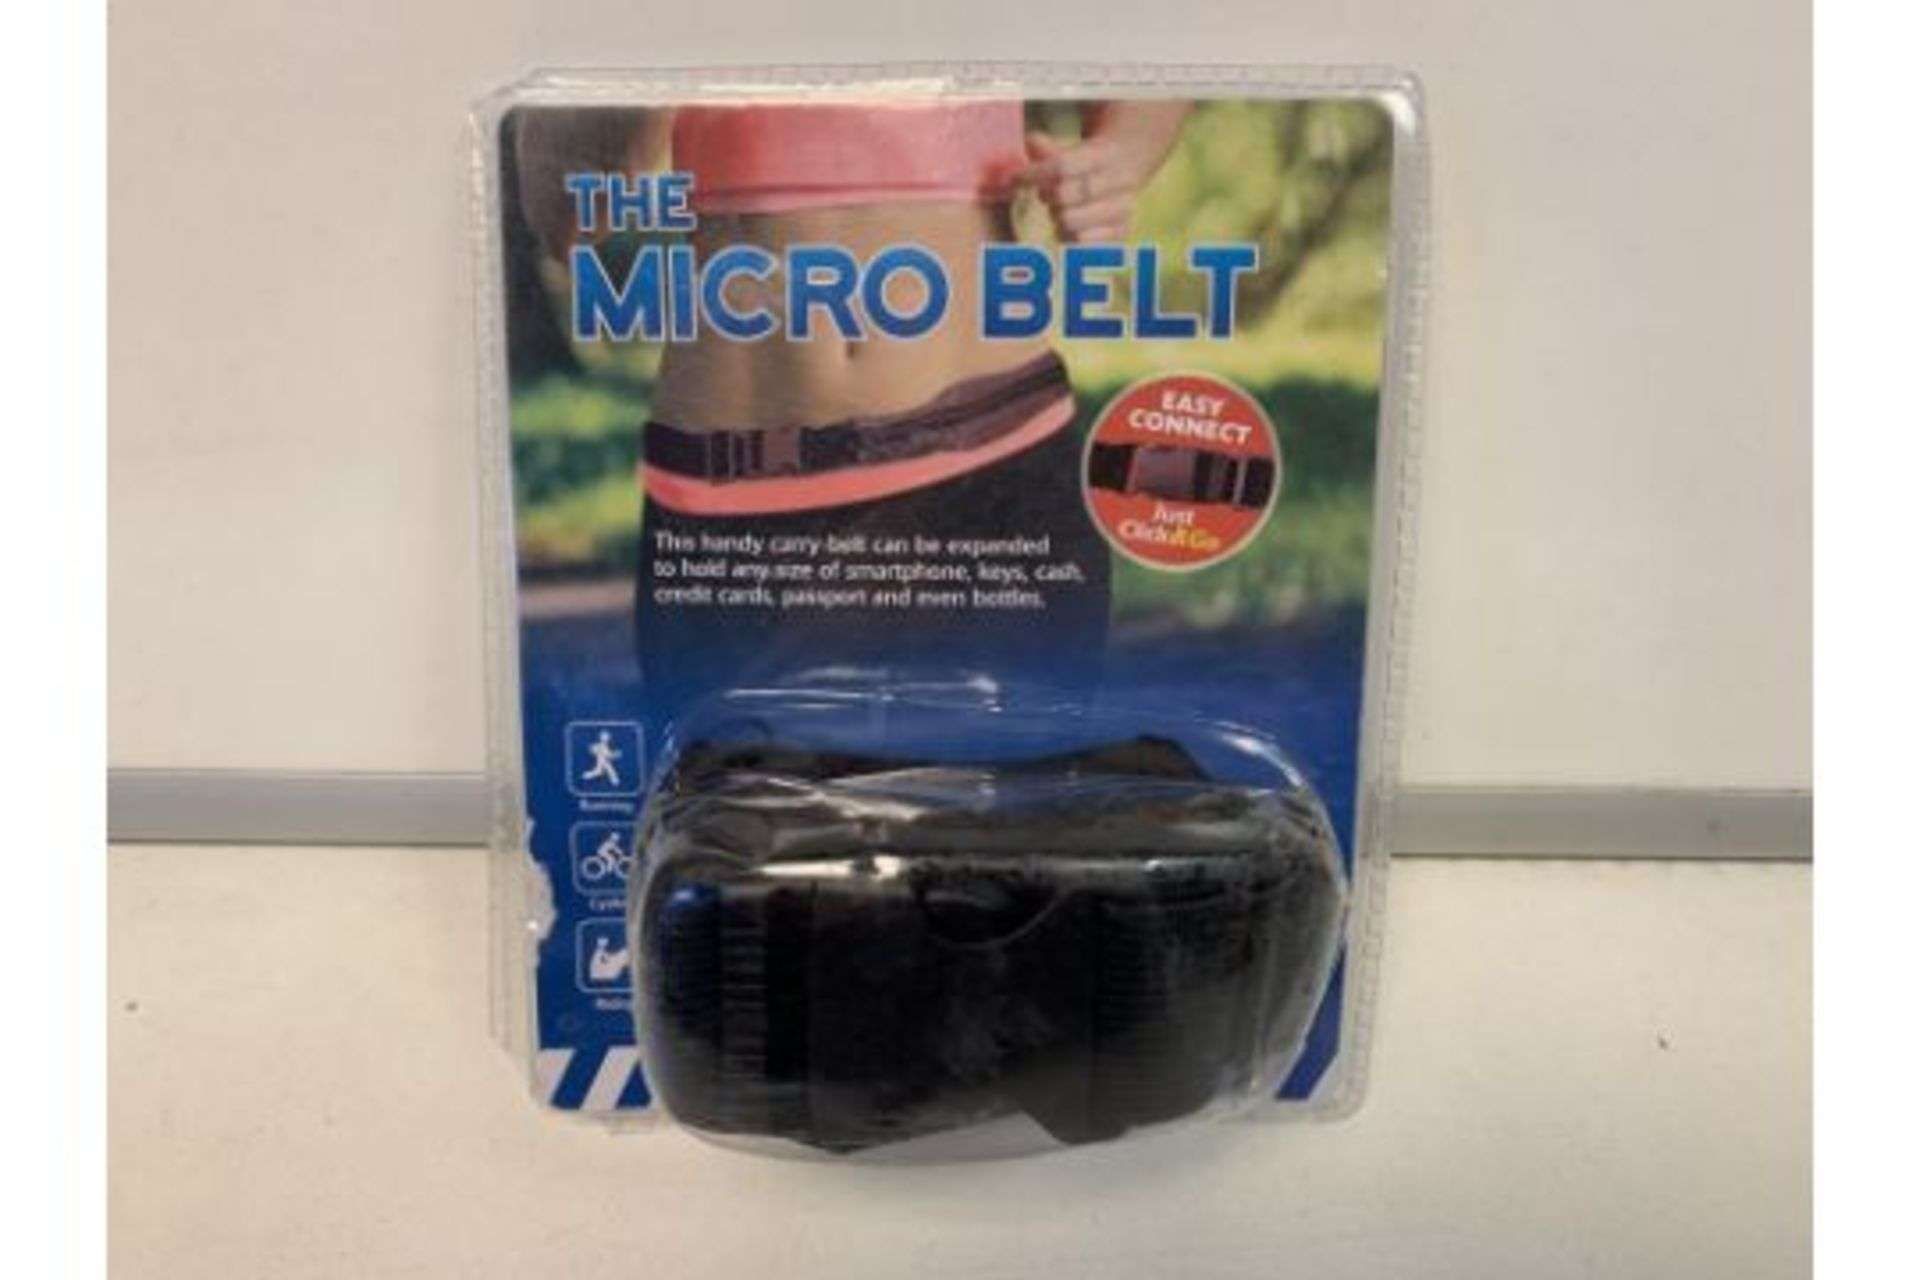 50 X NEW PACKAGED 'THE MICRO BELTS' HAND CARRY BELT CAN BE EXPANDED TO HOLD ANY SIZE OF